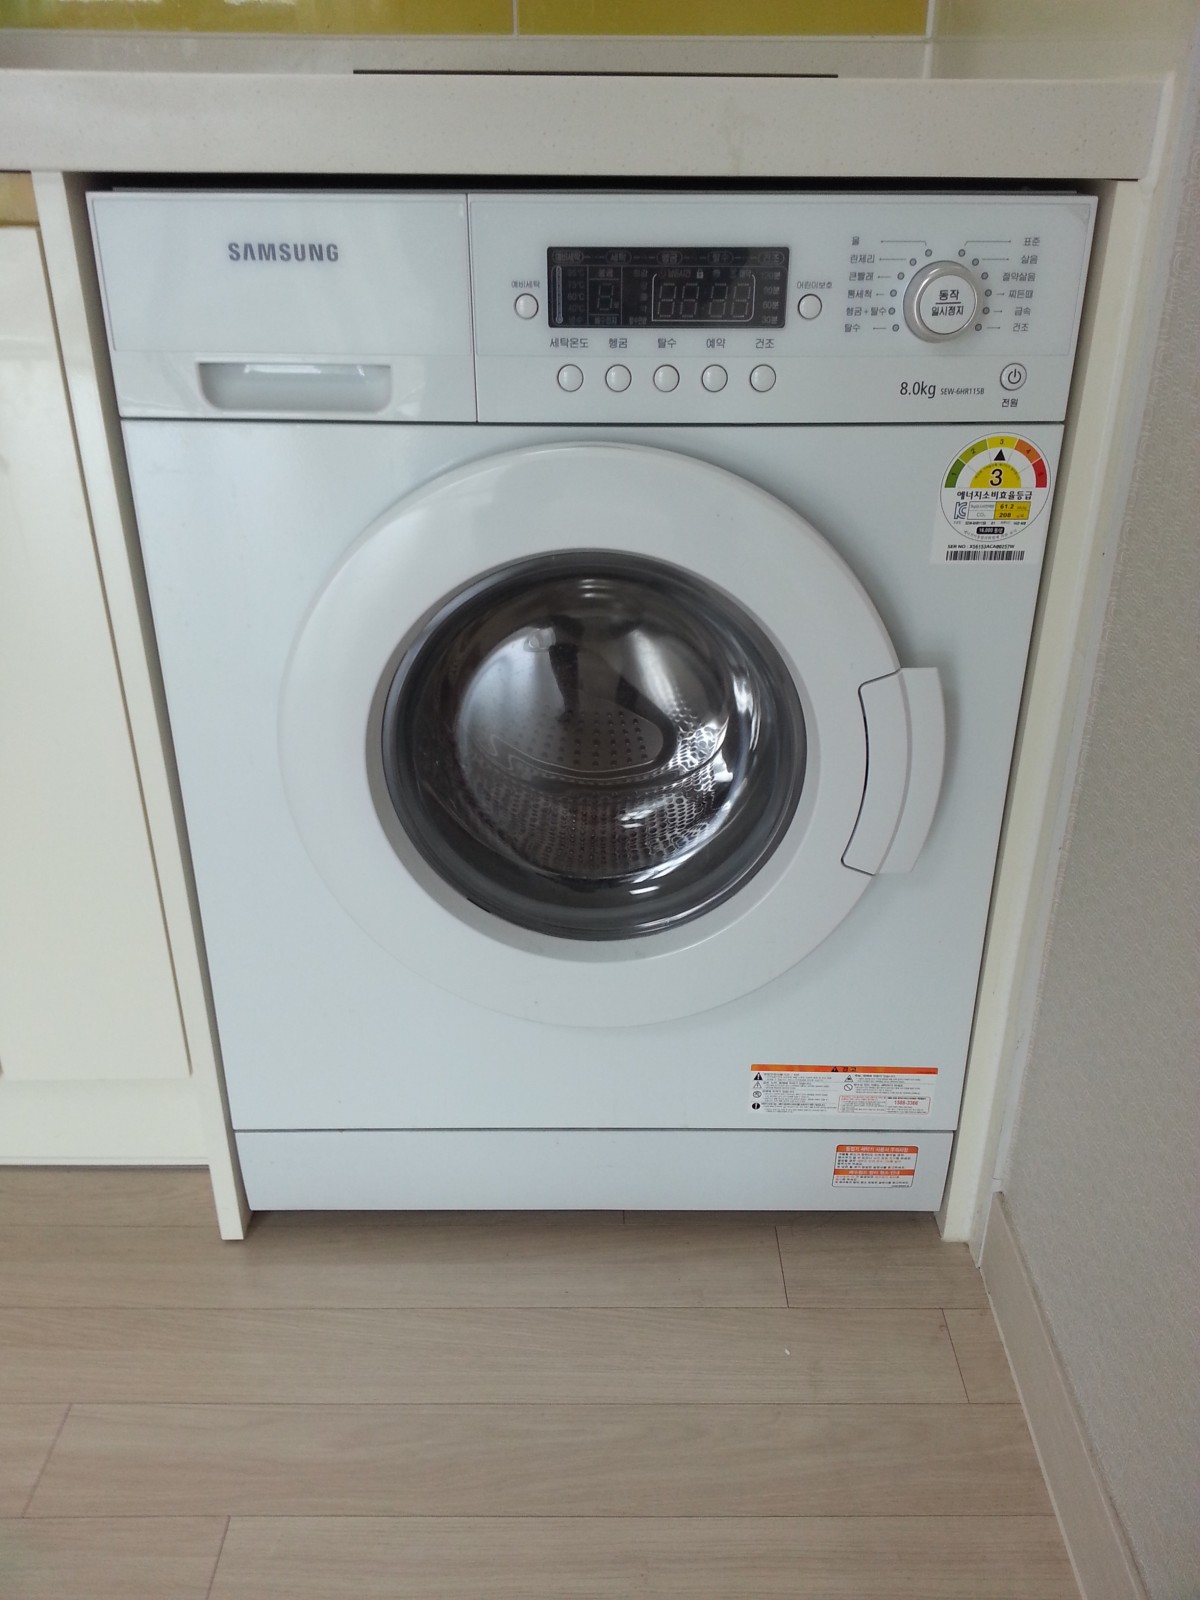 6 Steps for Cleaning a Washing Machine